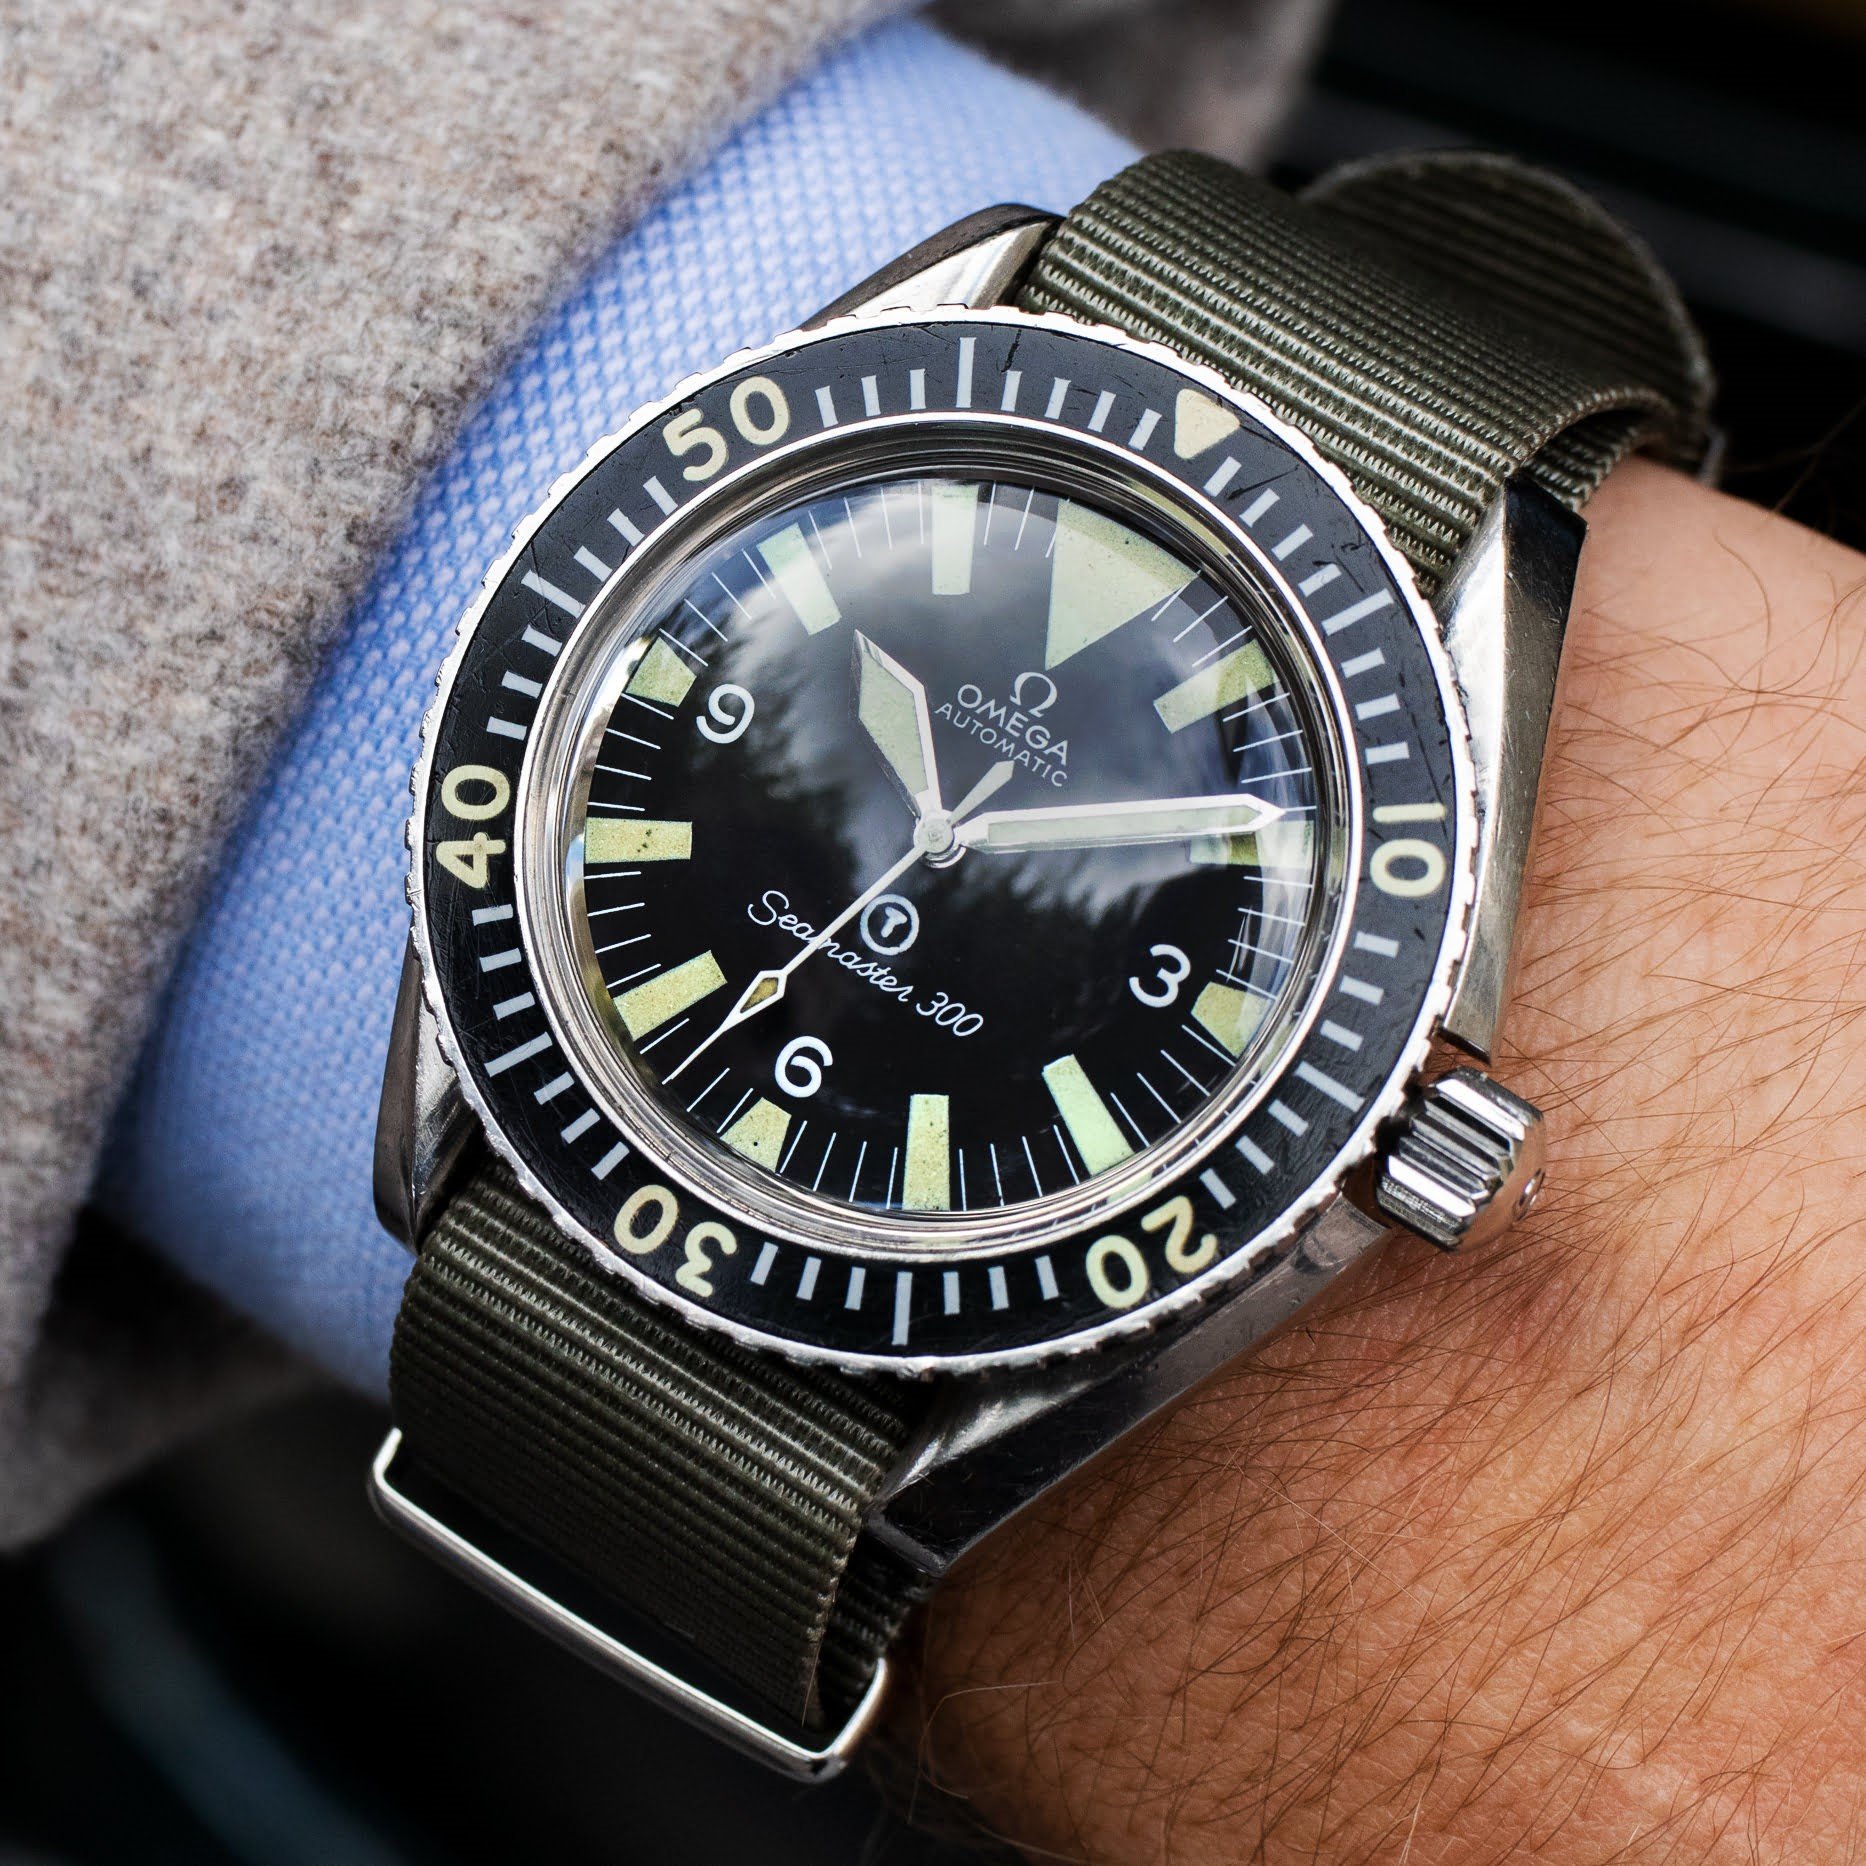 A LOOK AT THE BEST VINTAGE WATCHES EVER CREATED - Coronet - Rolex Stories